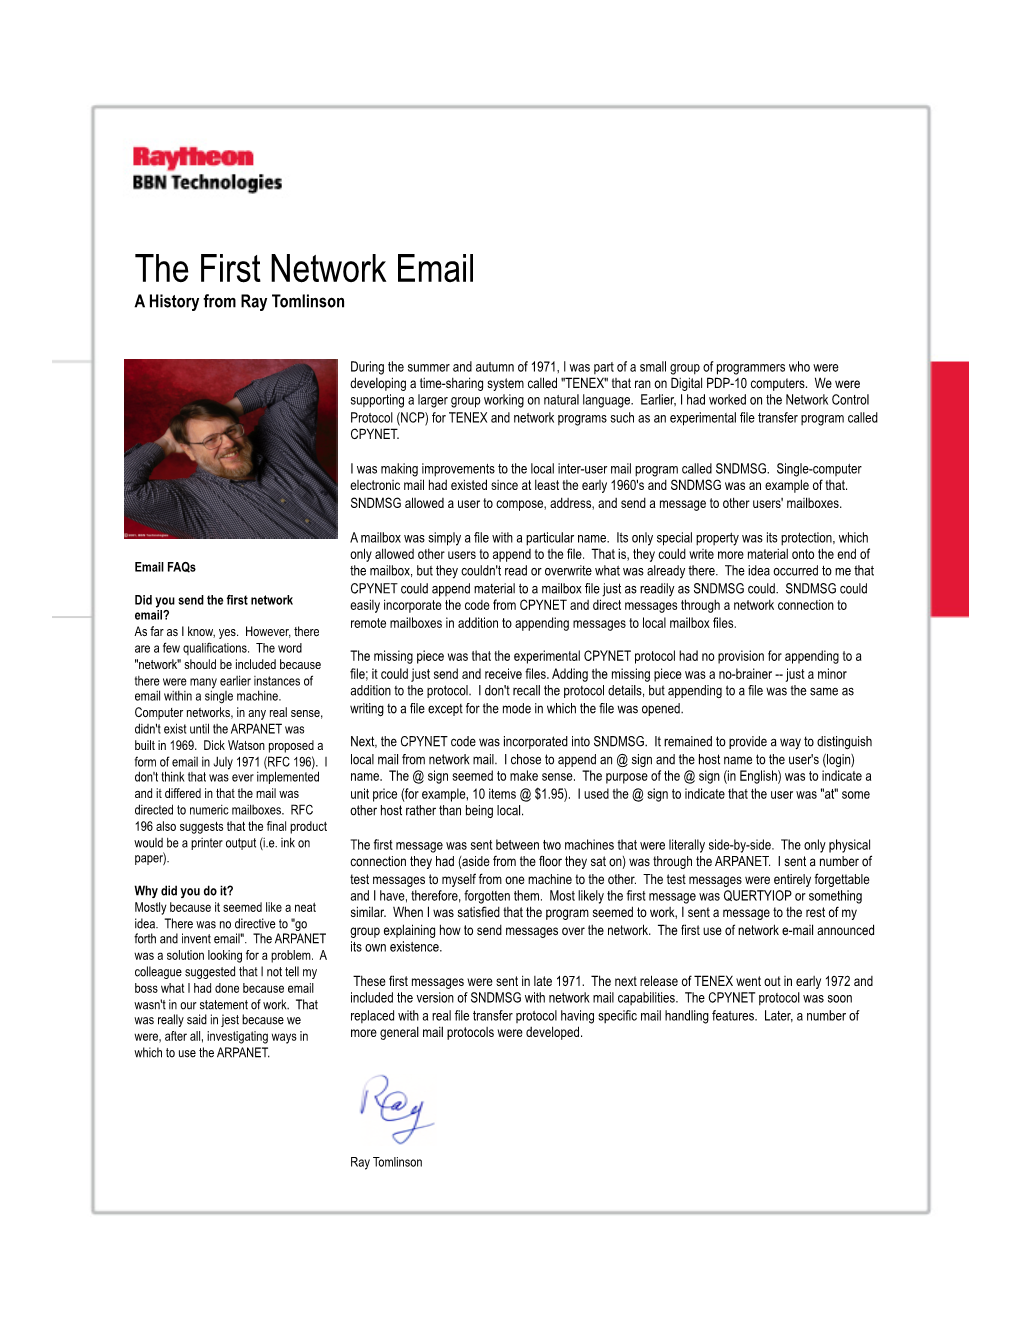 The First Network Email a History from Ray Tomlinson